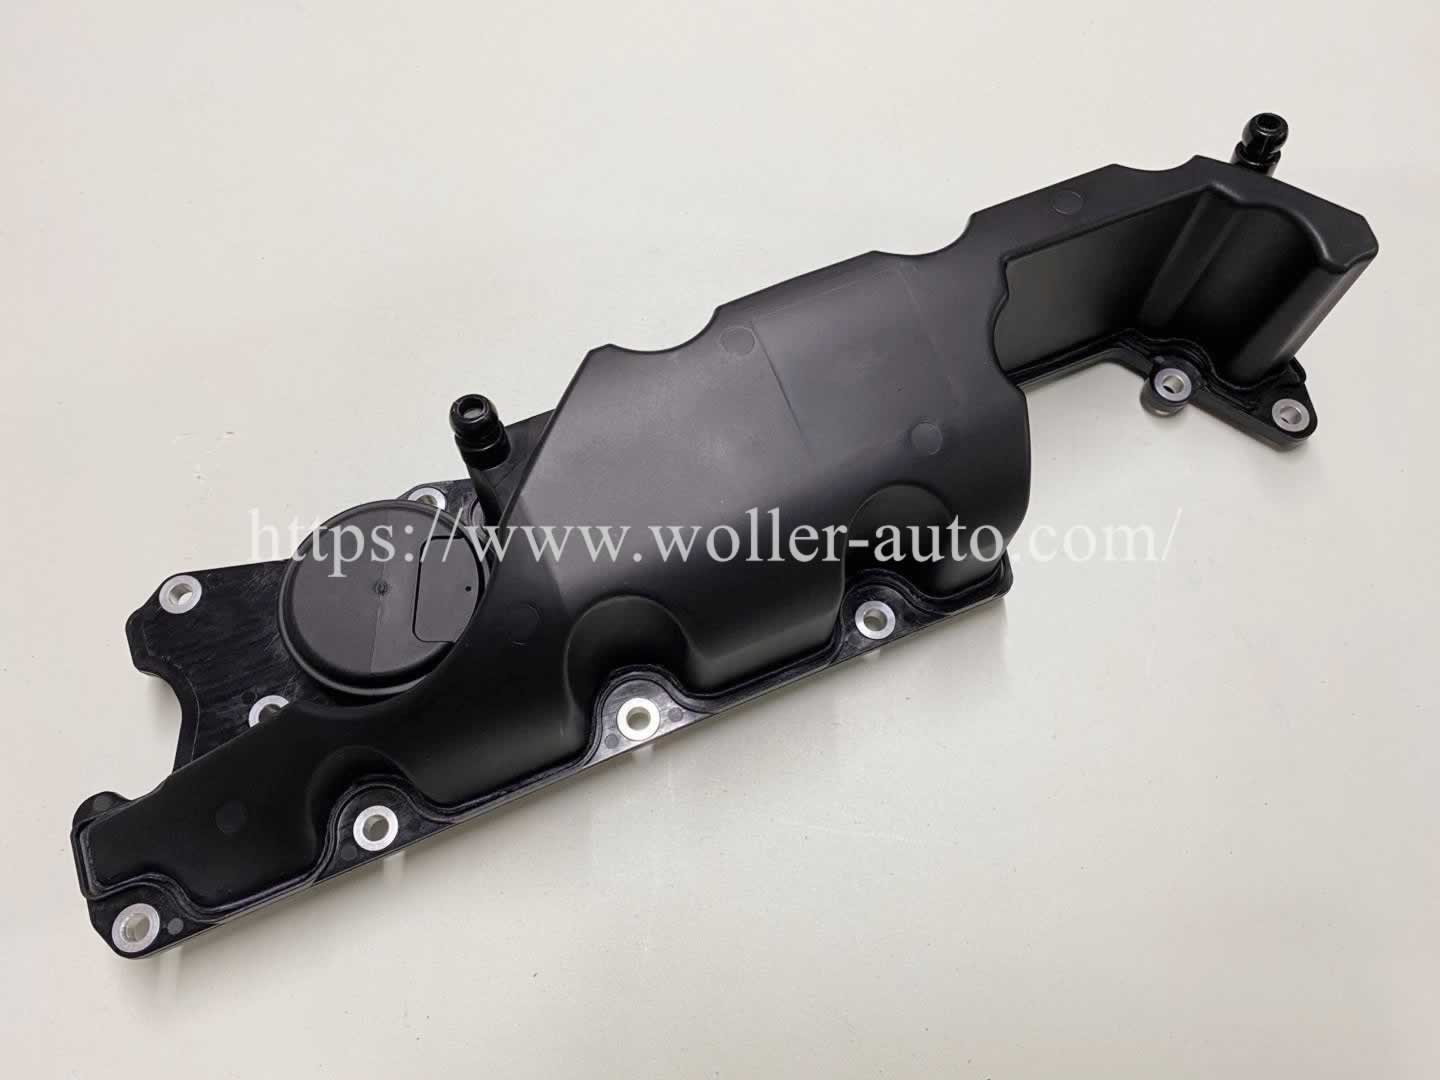 Engine Valve Cover Cylinder Head Cover 3.2 L6 OE LR023777 For Land Rover LR2 08-12